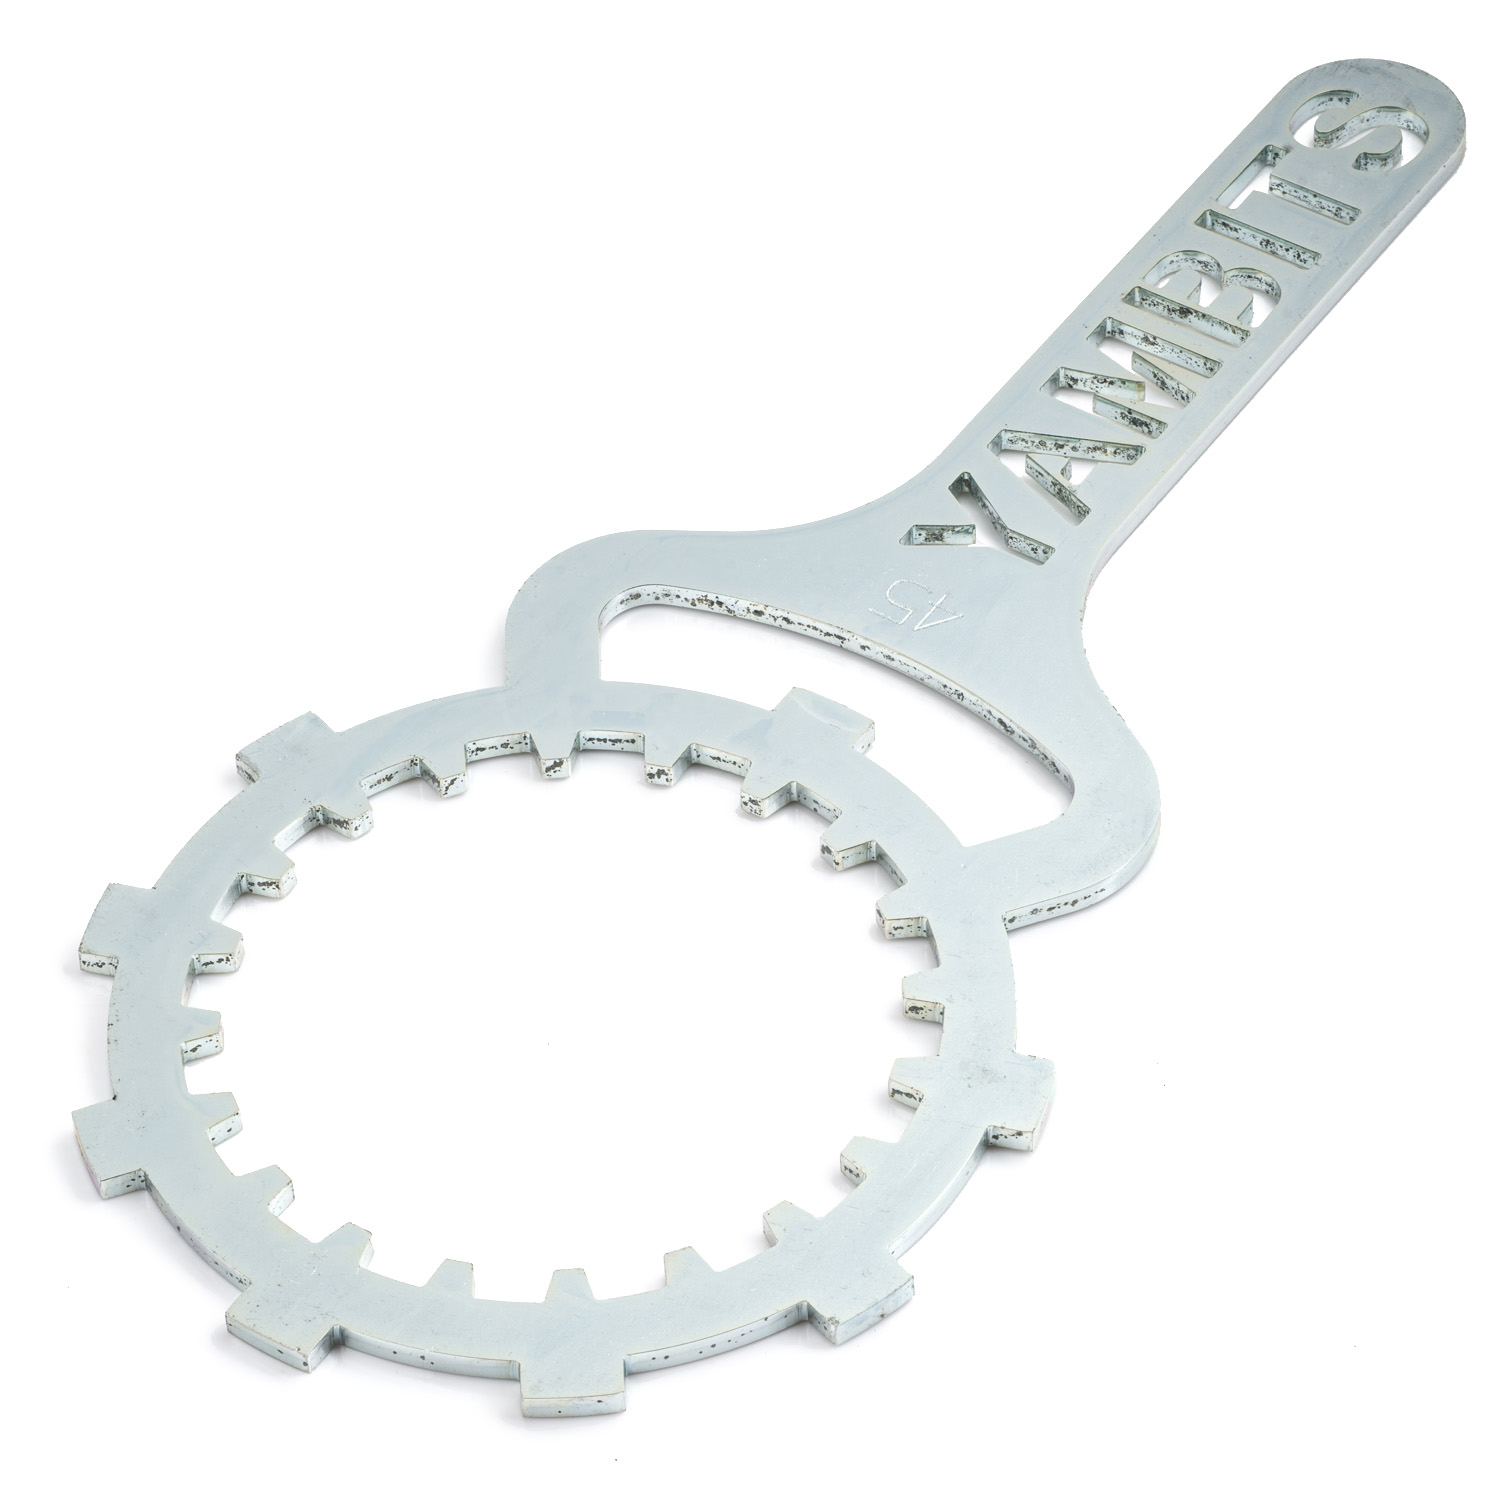 TY125 Clutch Holding Tool